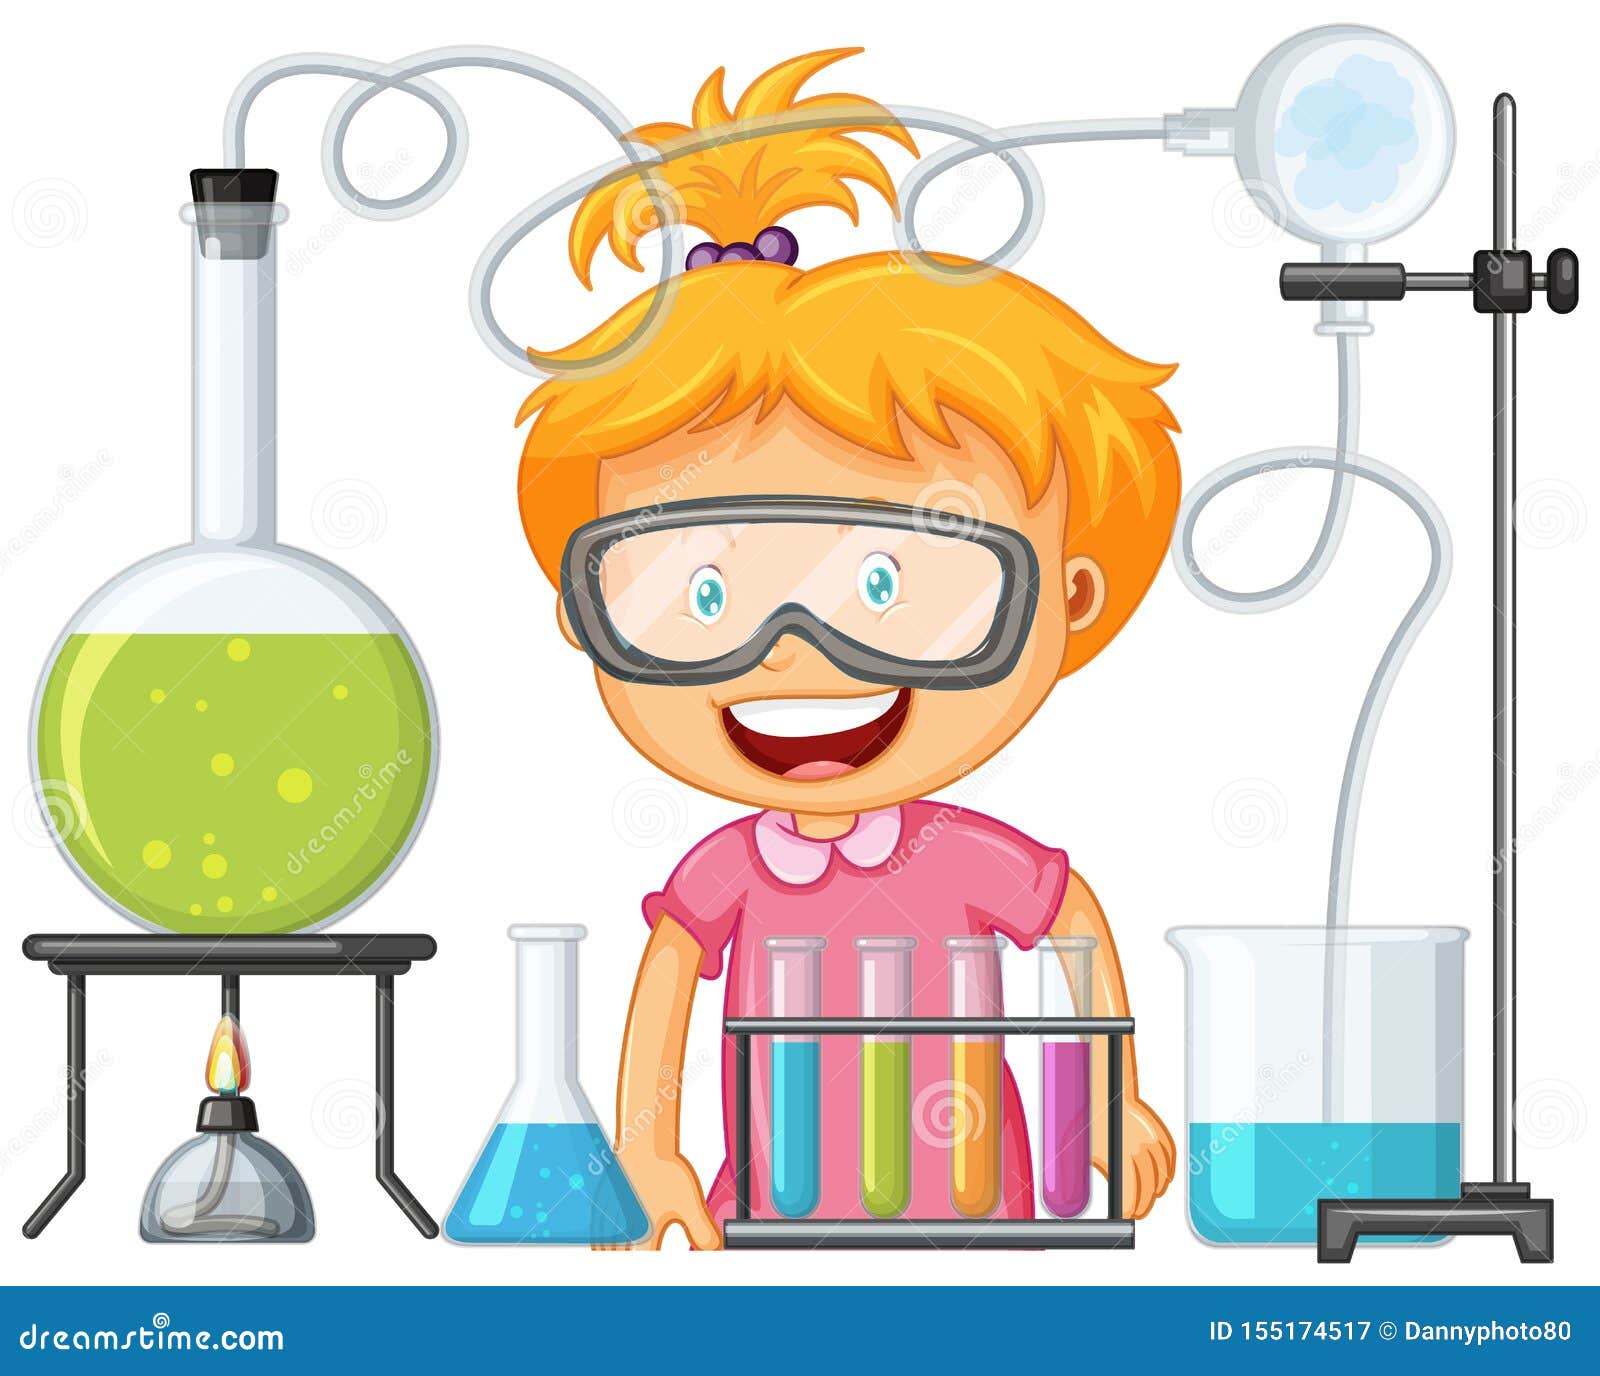 Scientist Working with Science Tools in Lab Stock Vector - Illustration ...